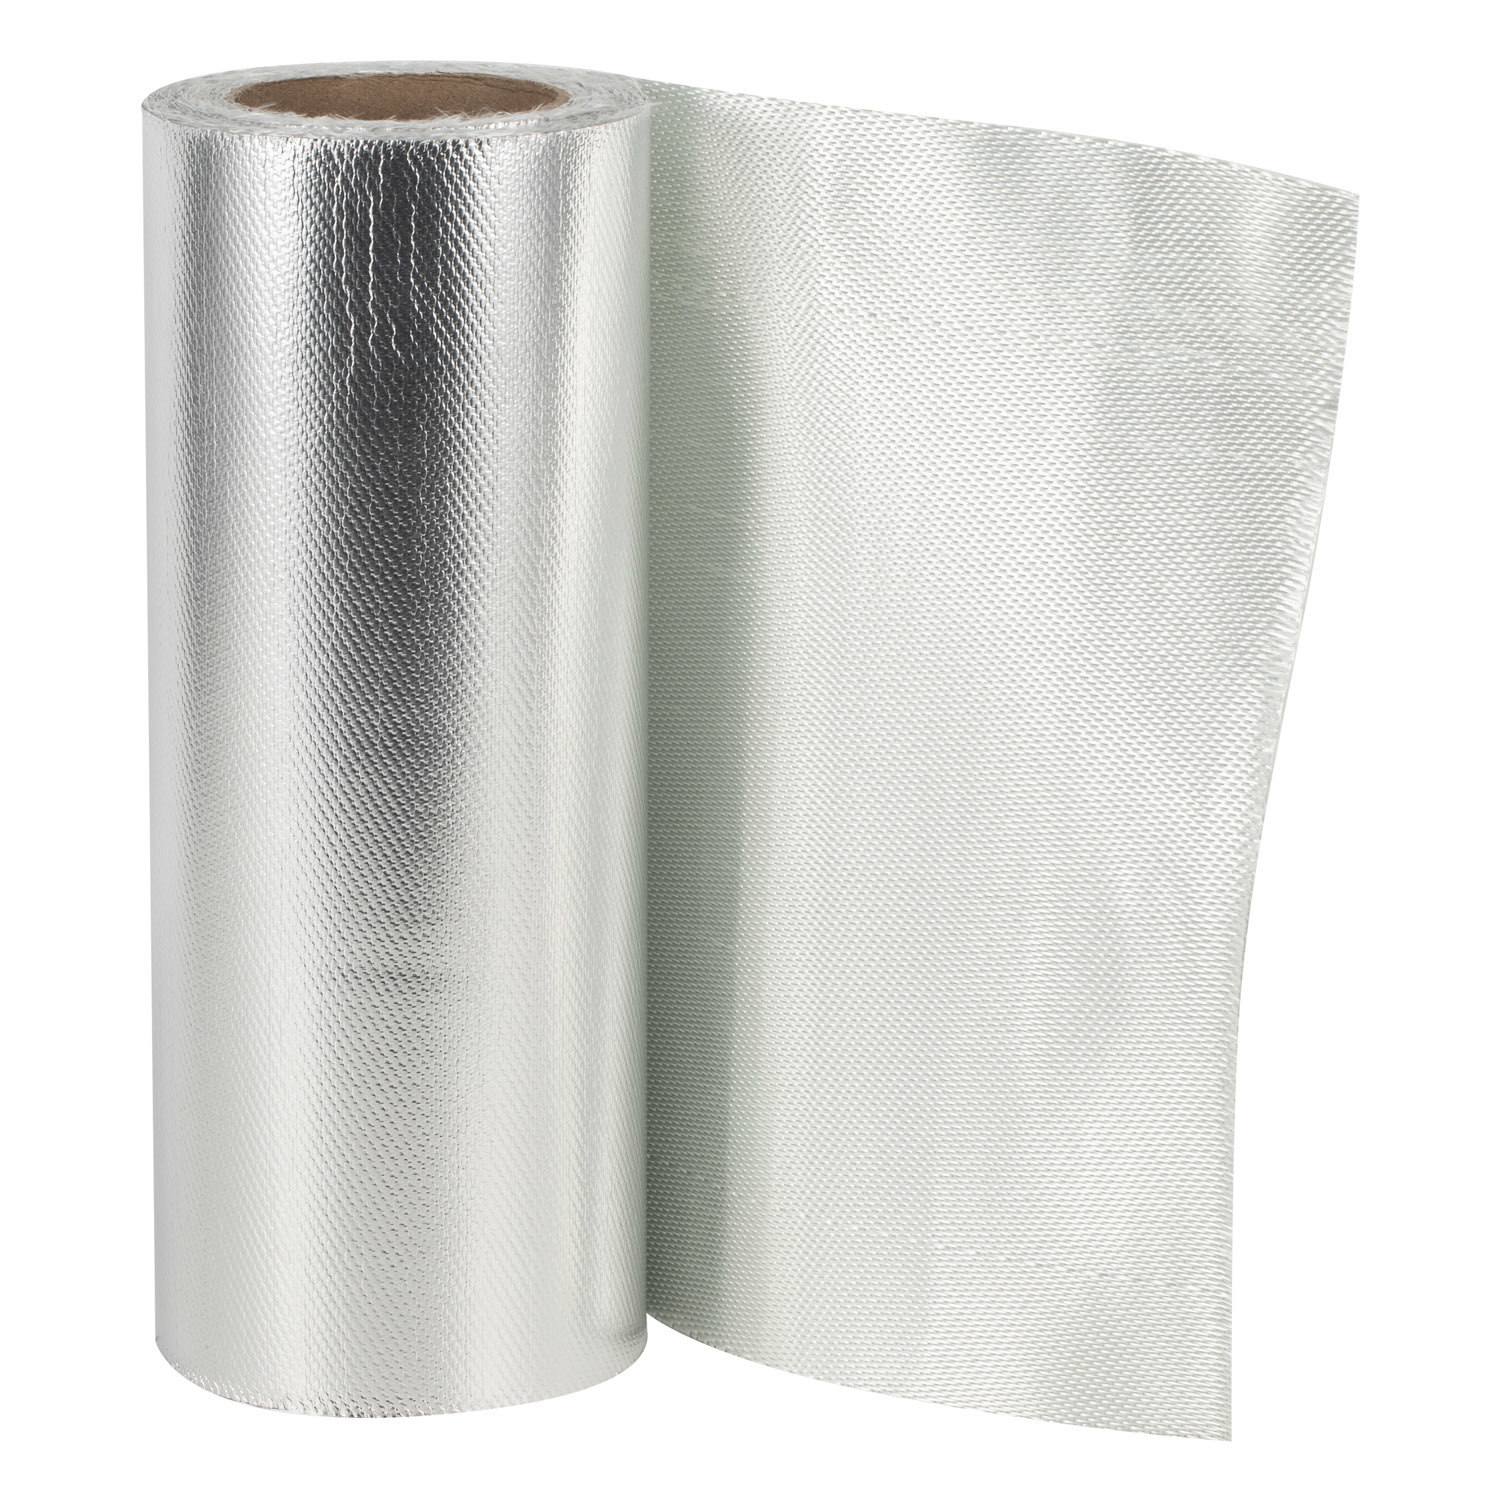 Al-3784 Thermal Insulation And Fireproof Glass Fiber Cloth